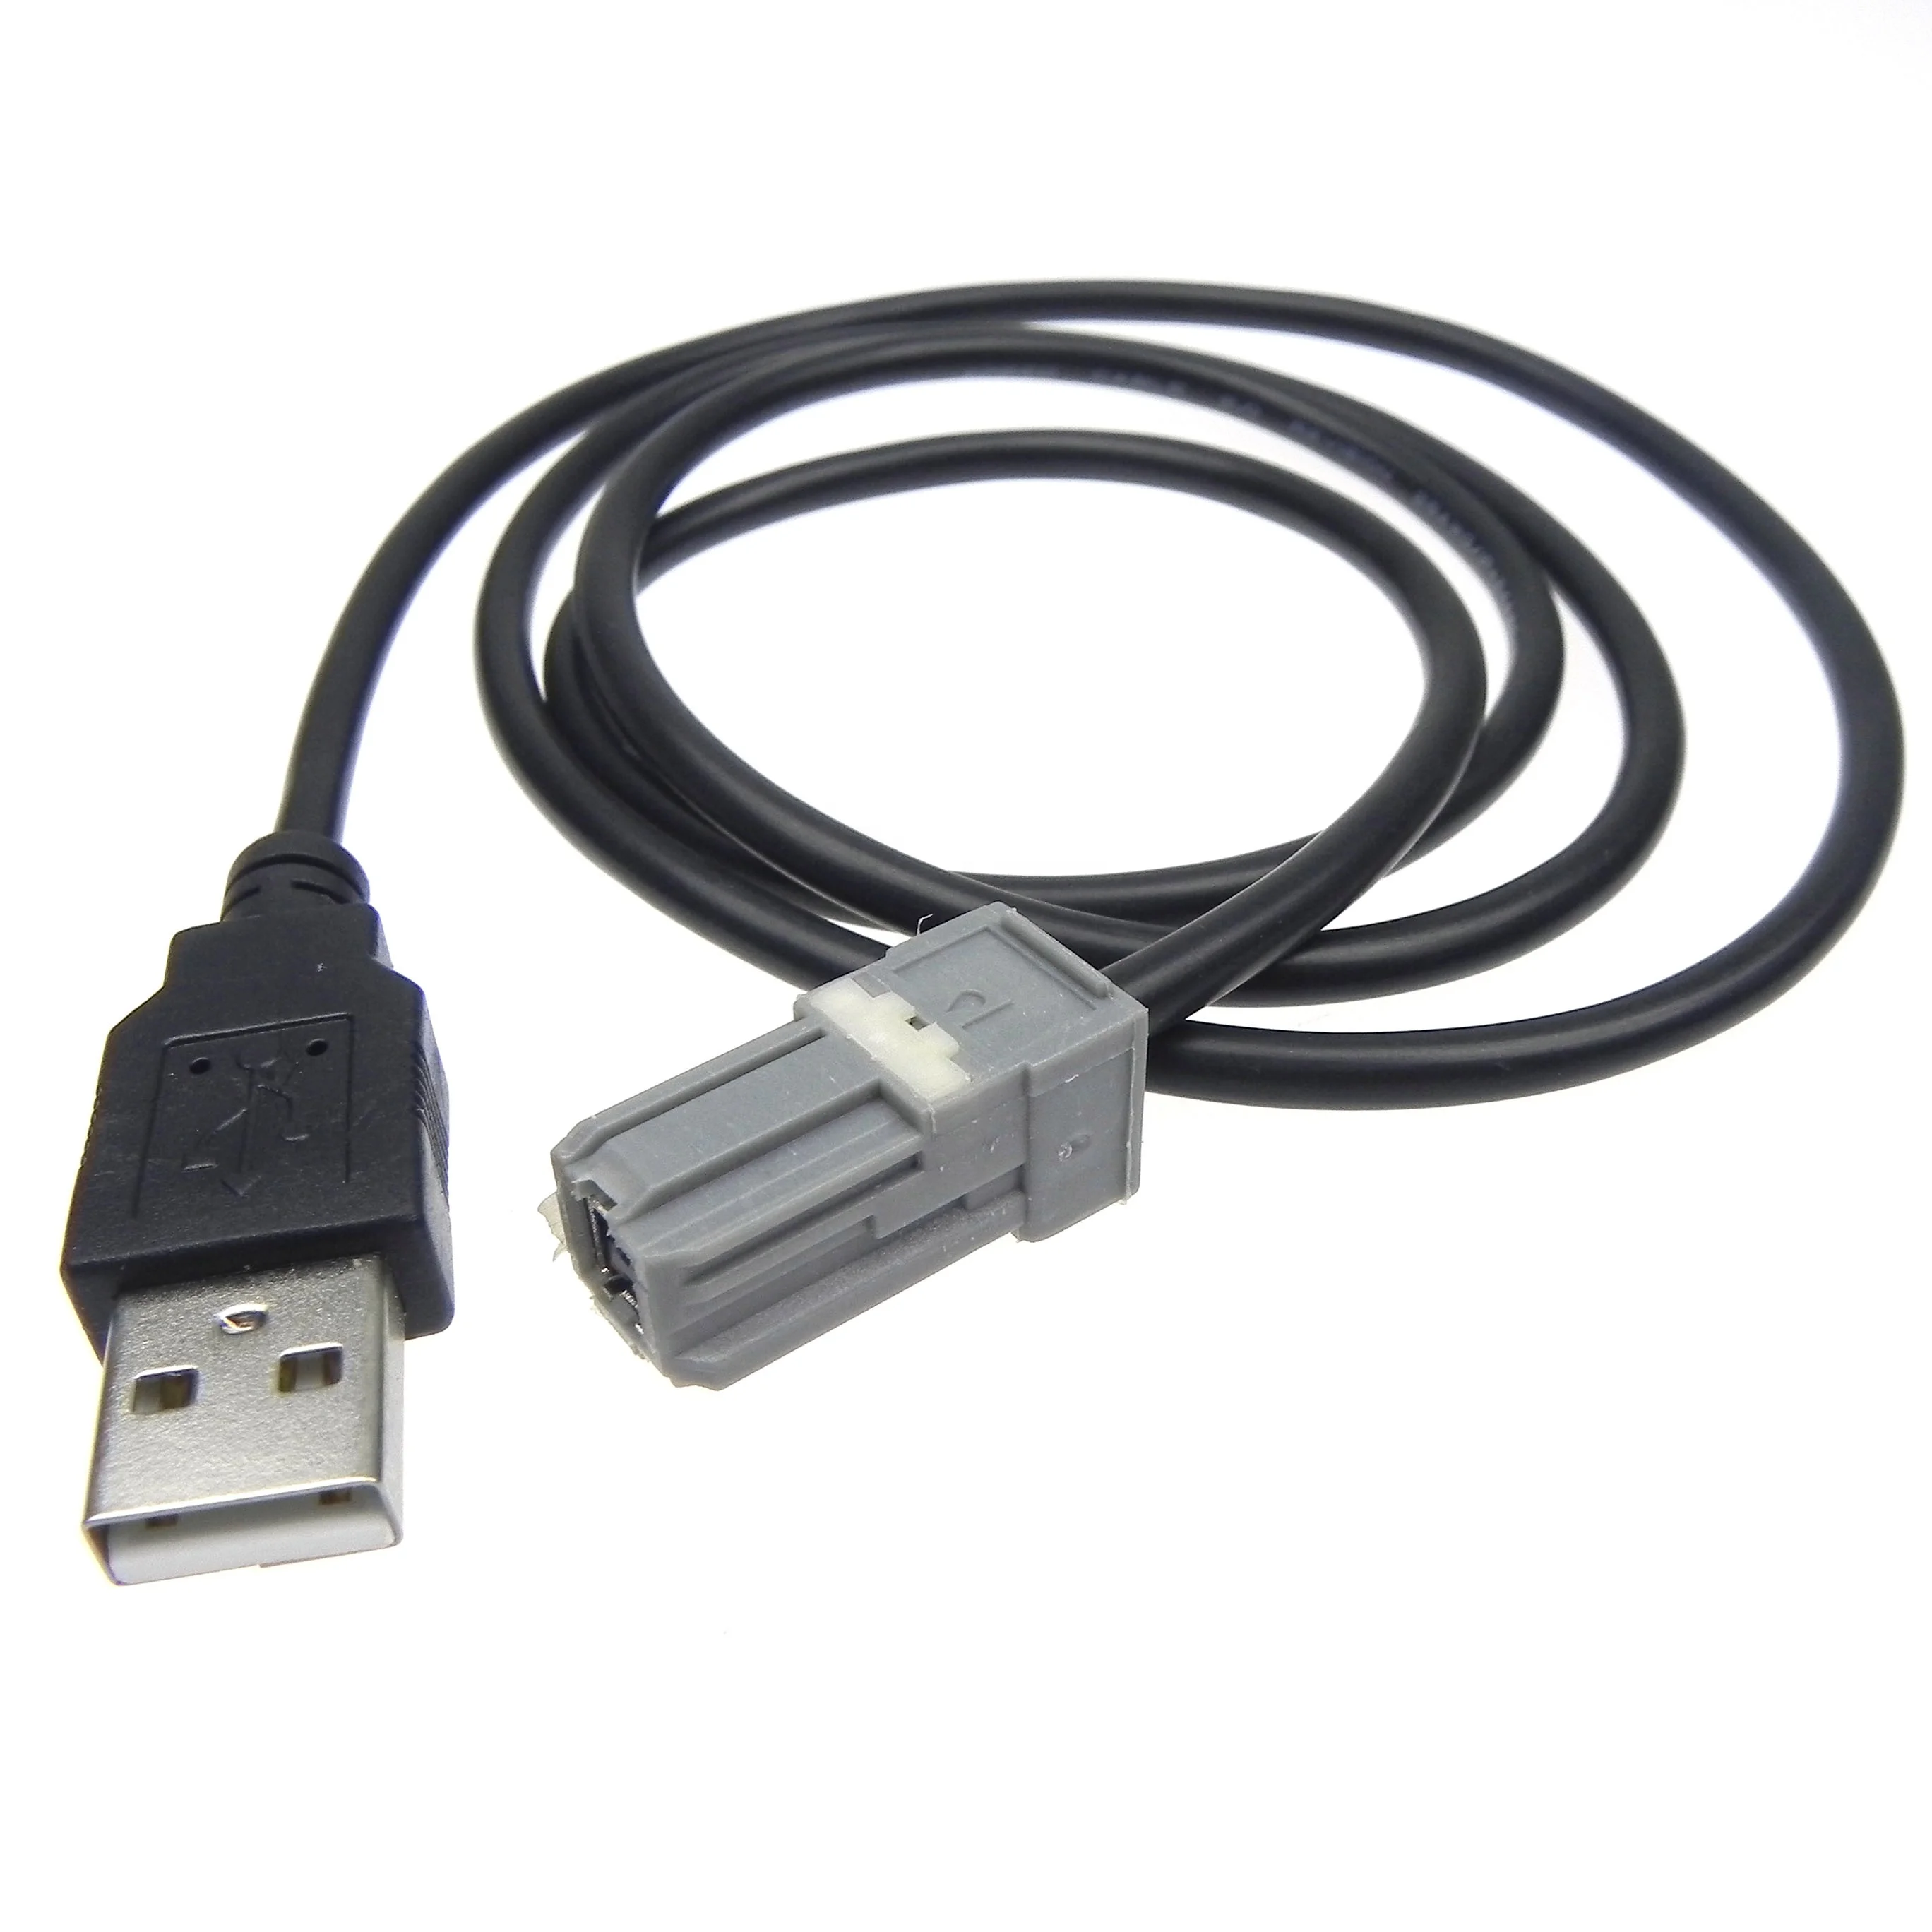 

High Quality Mazur Toyota Reiz Camry Mazda Subaru Forester Ling Pai Nissan USB to Male connection cable